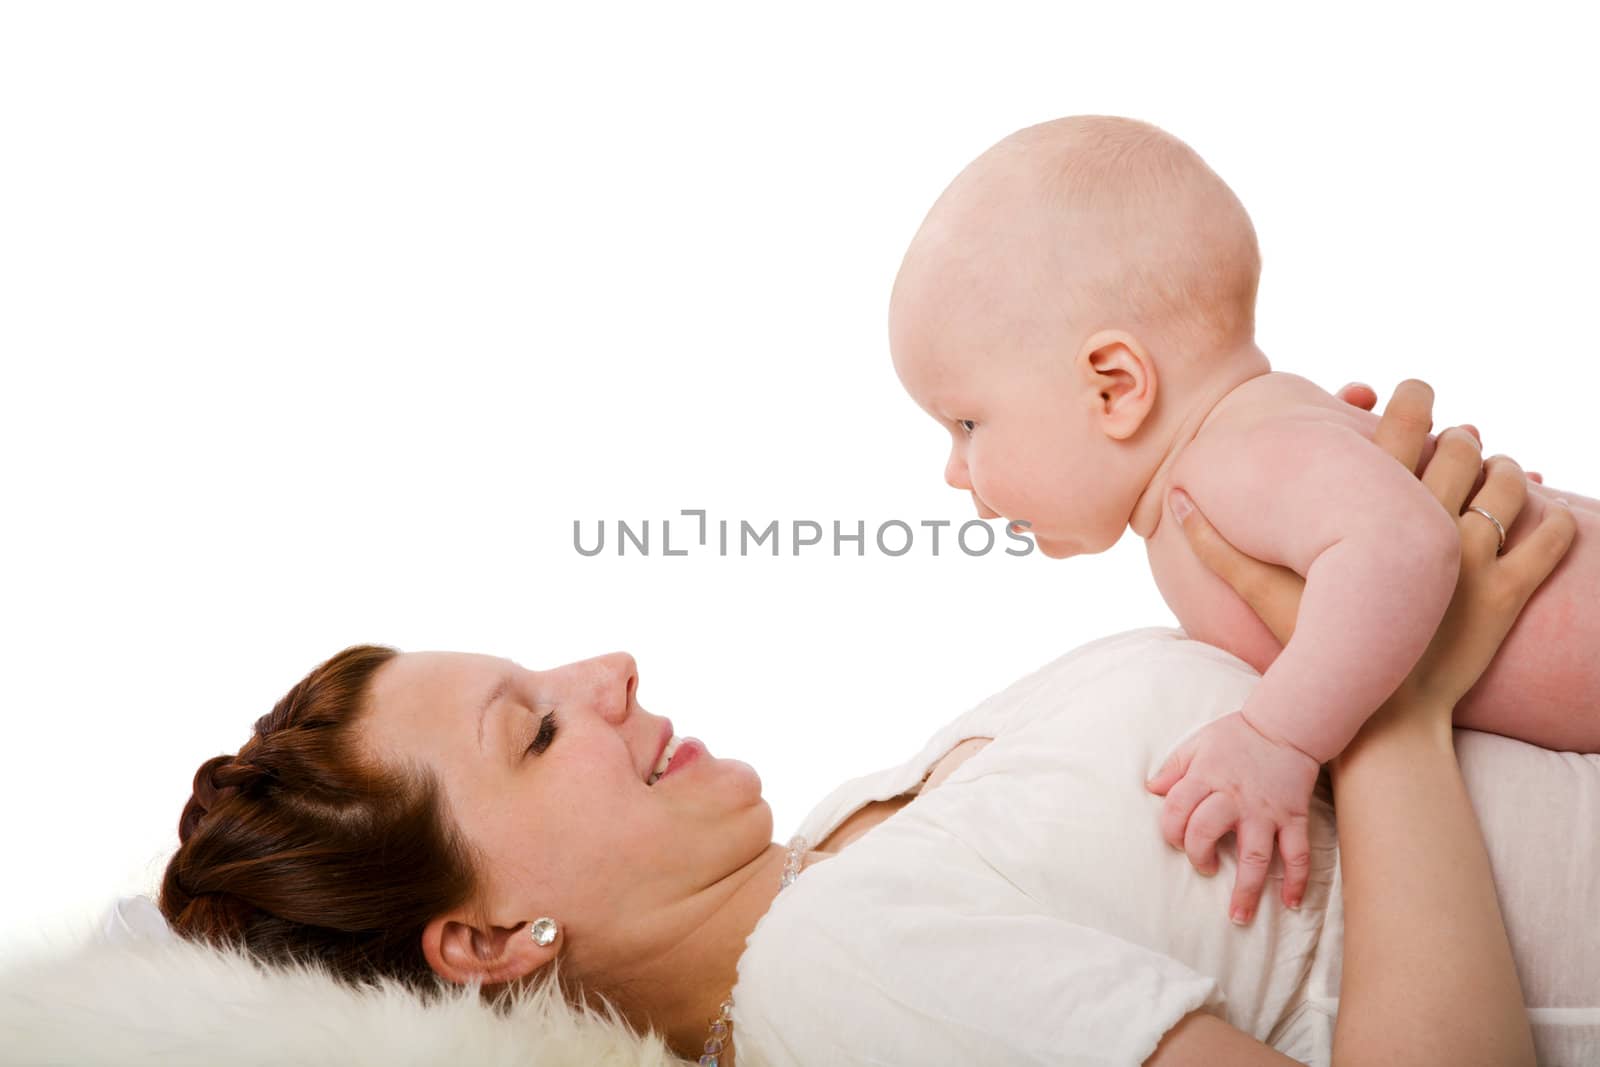 Happy mother holding her baby closeup portrait